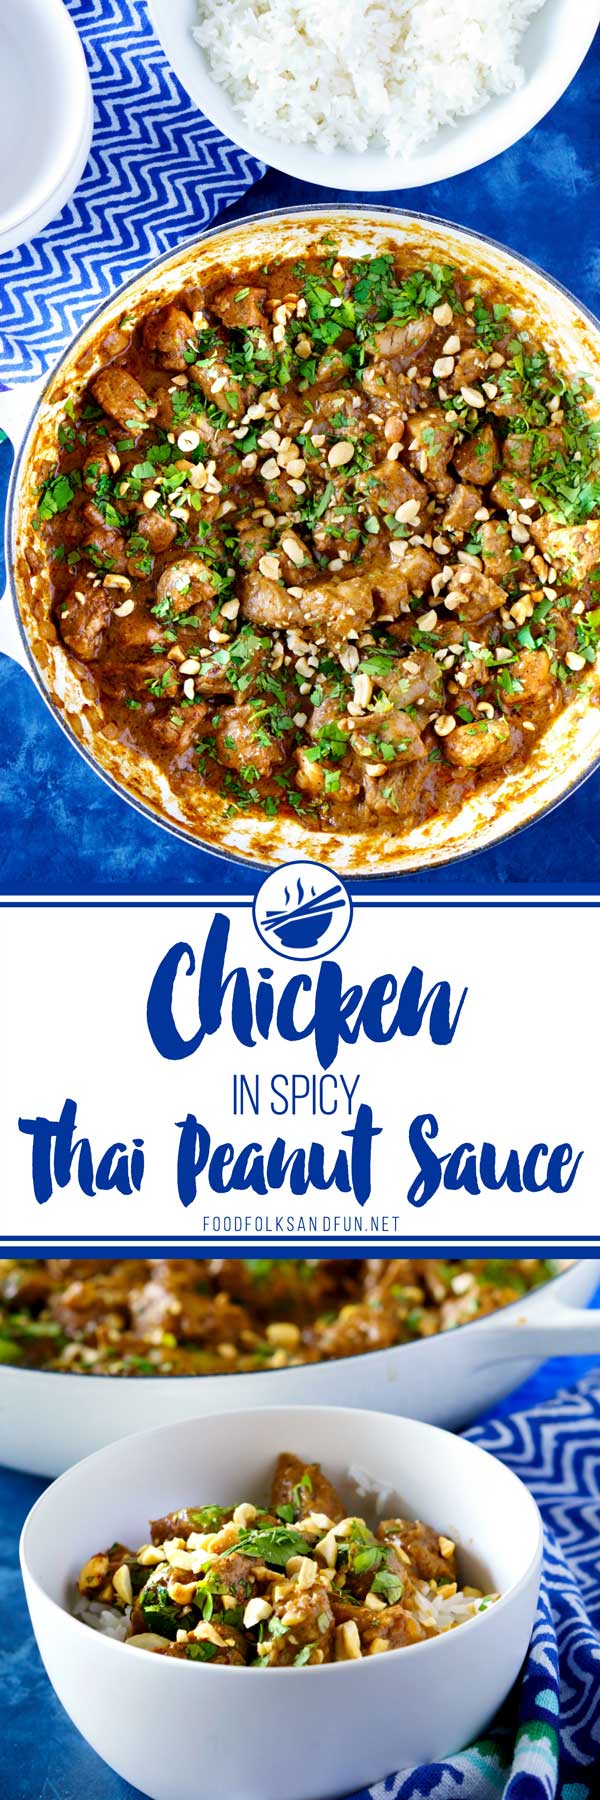 This Chicken in Spicy Thai Peanut Sauce is some serious comfort food! It's spicy, creamy, and so flavorful! 50 minutes is all you need to make this take out classic at home! via @foodfolksandfun